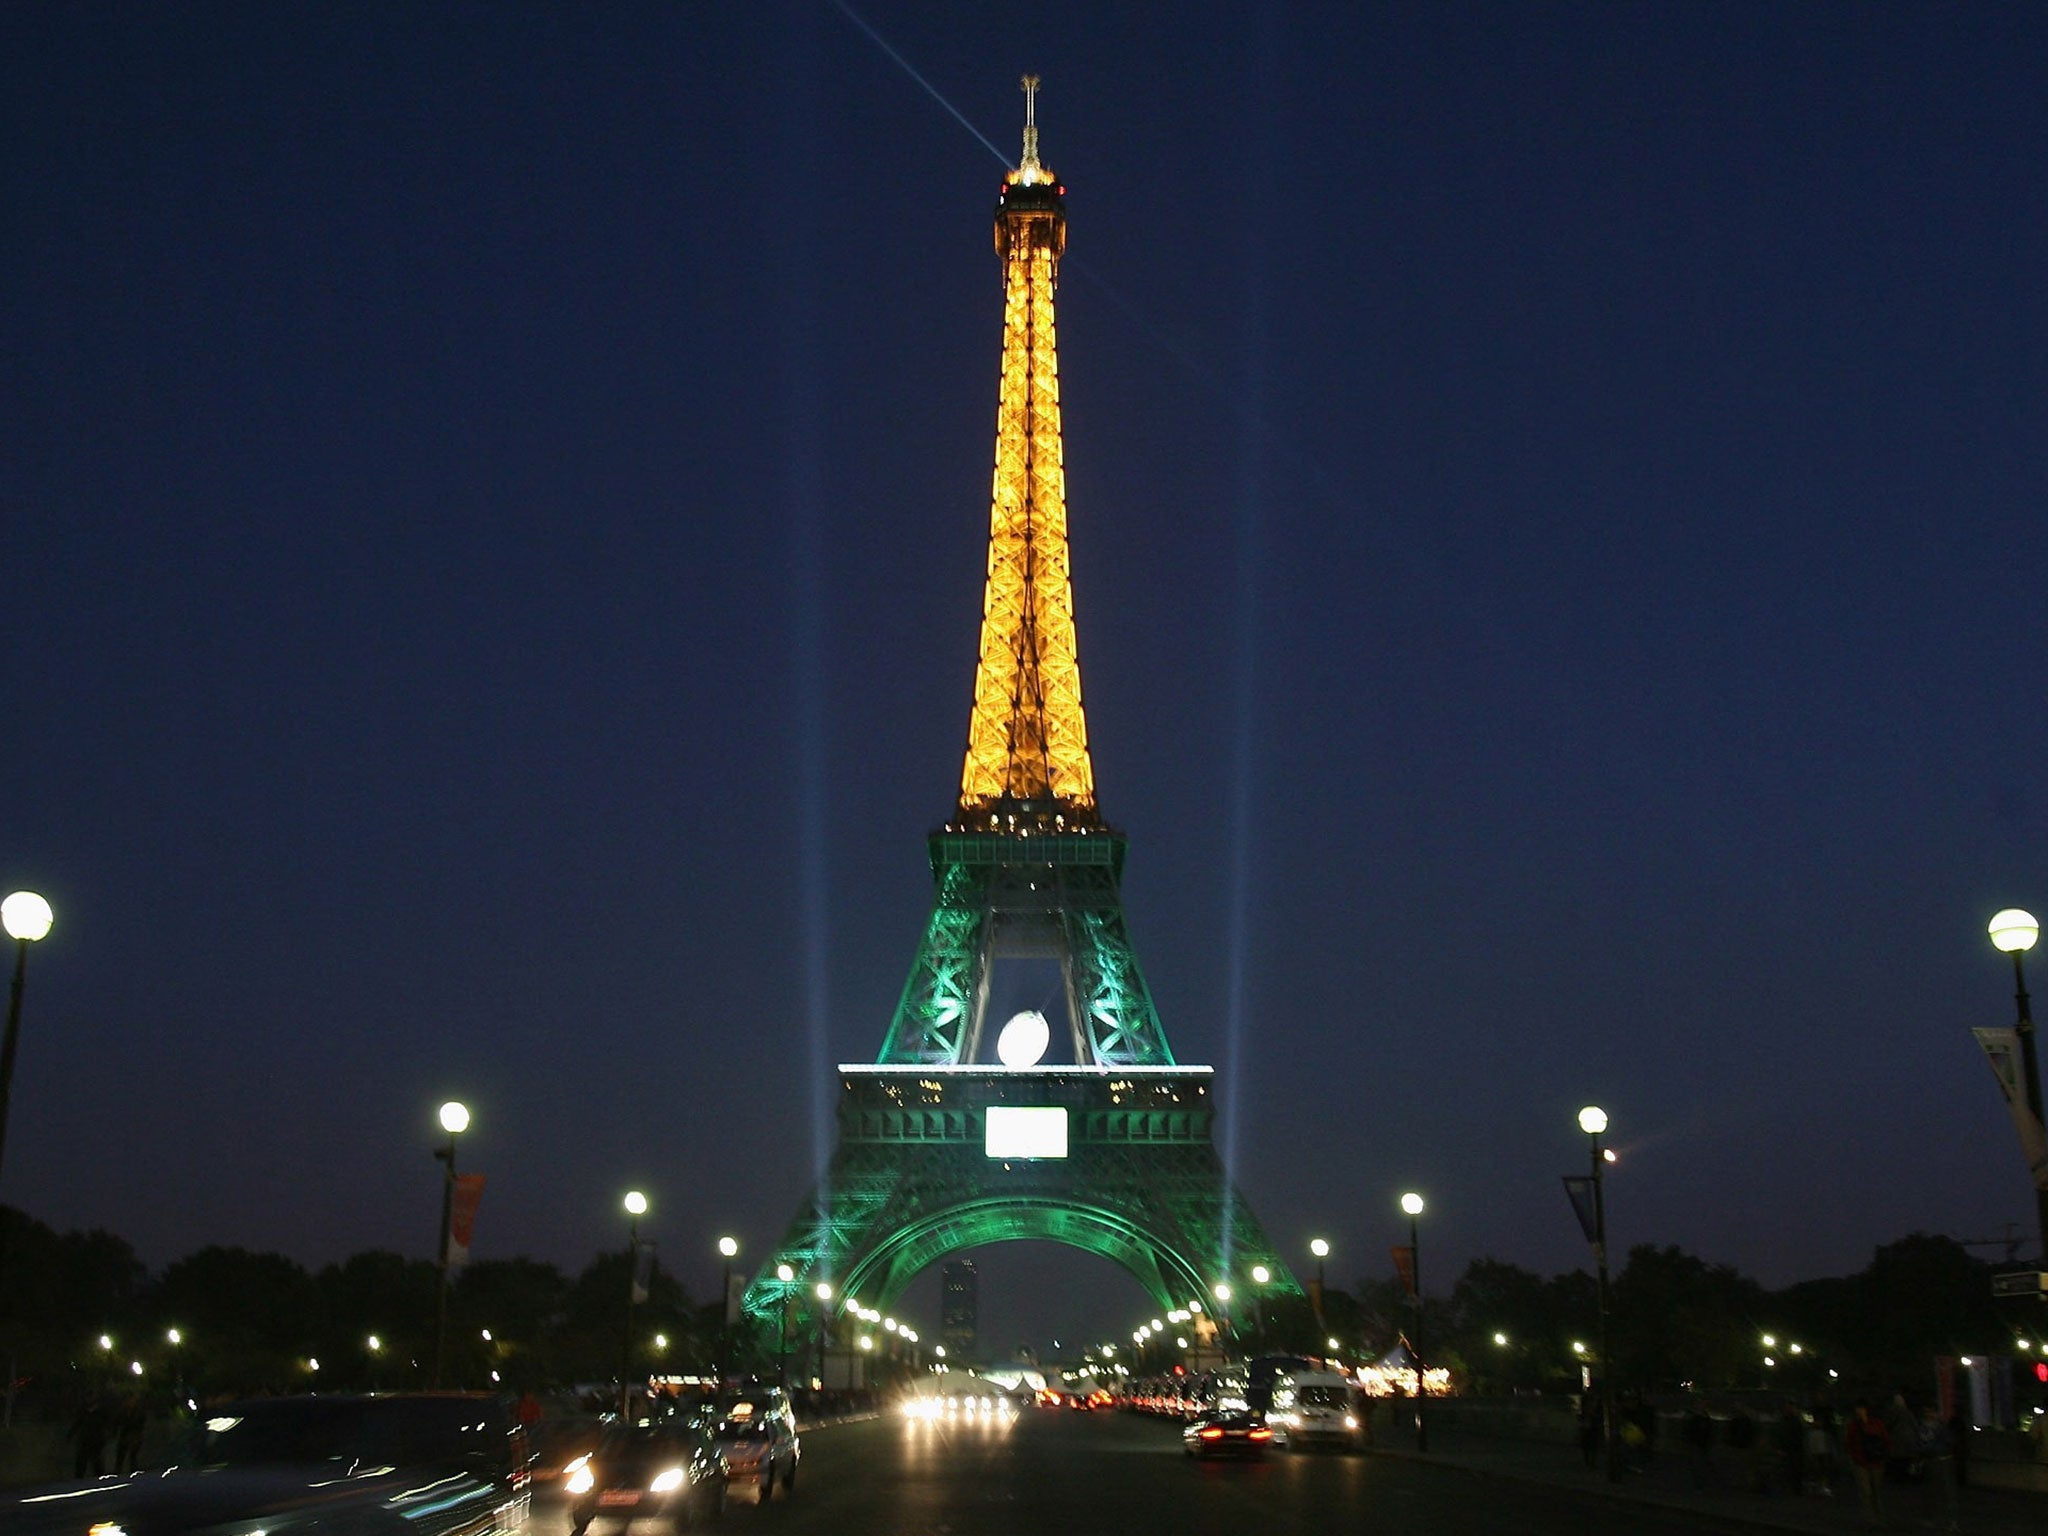 The Eiffel Tower was illuminated in green and white for the 2007 Rugby World Cup